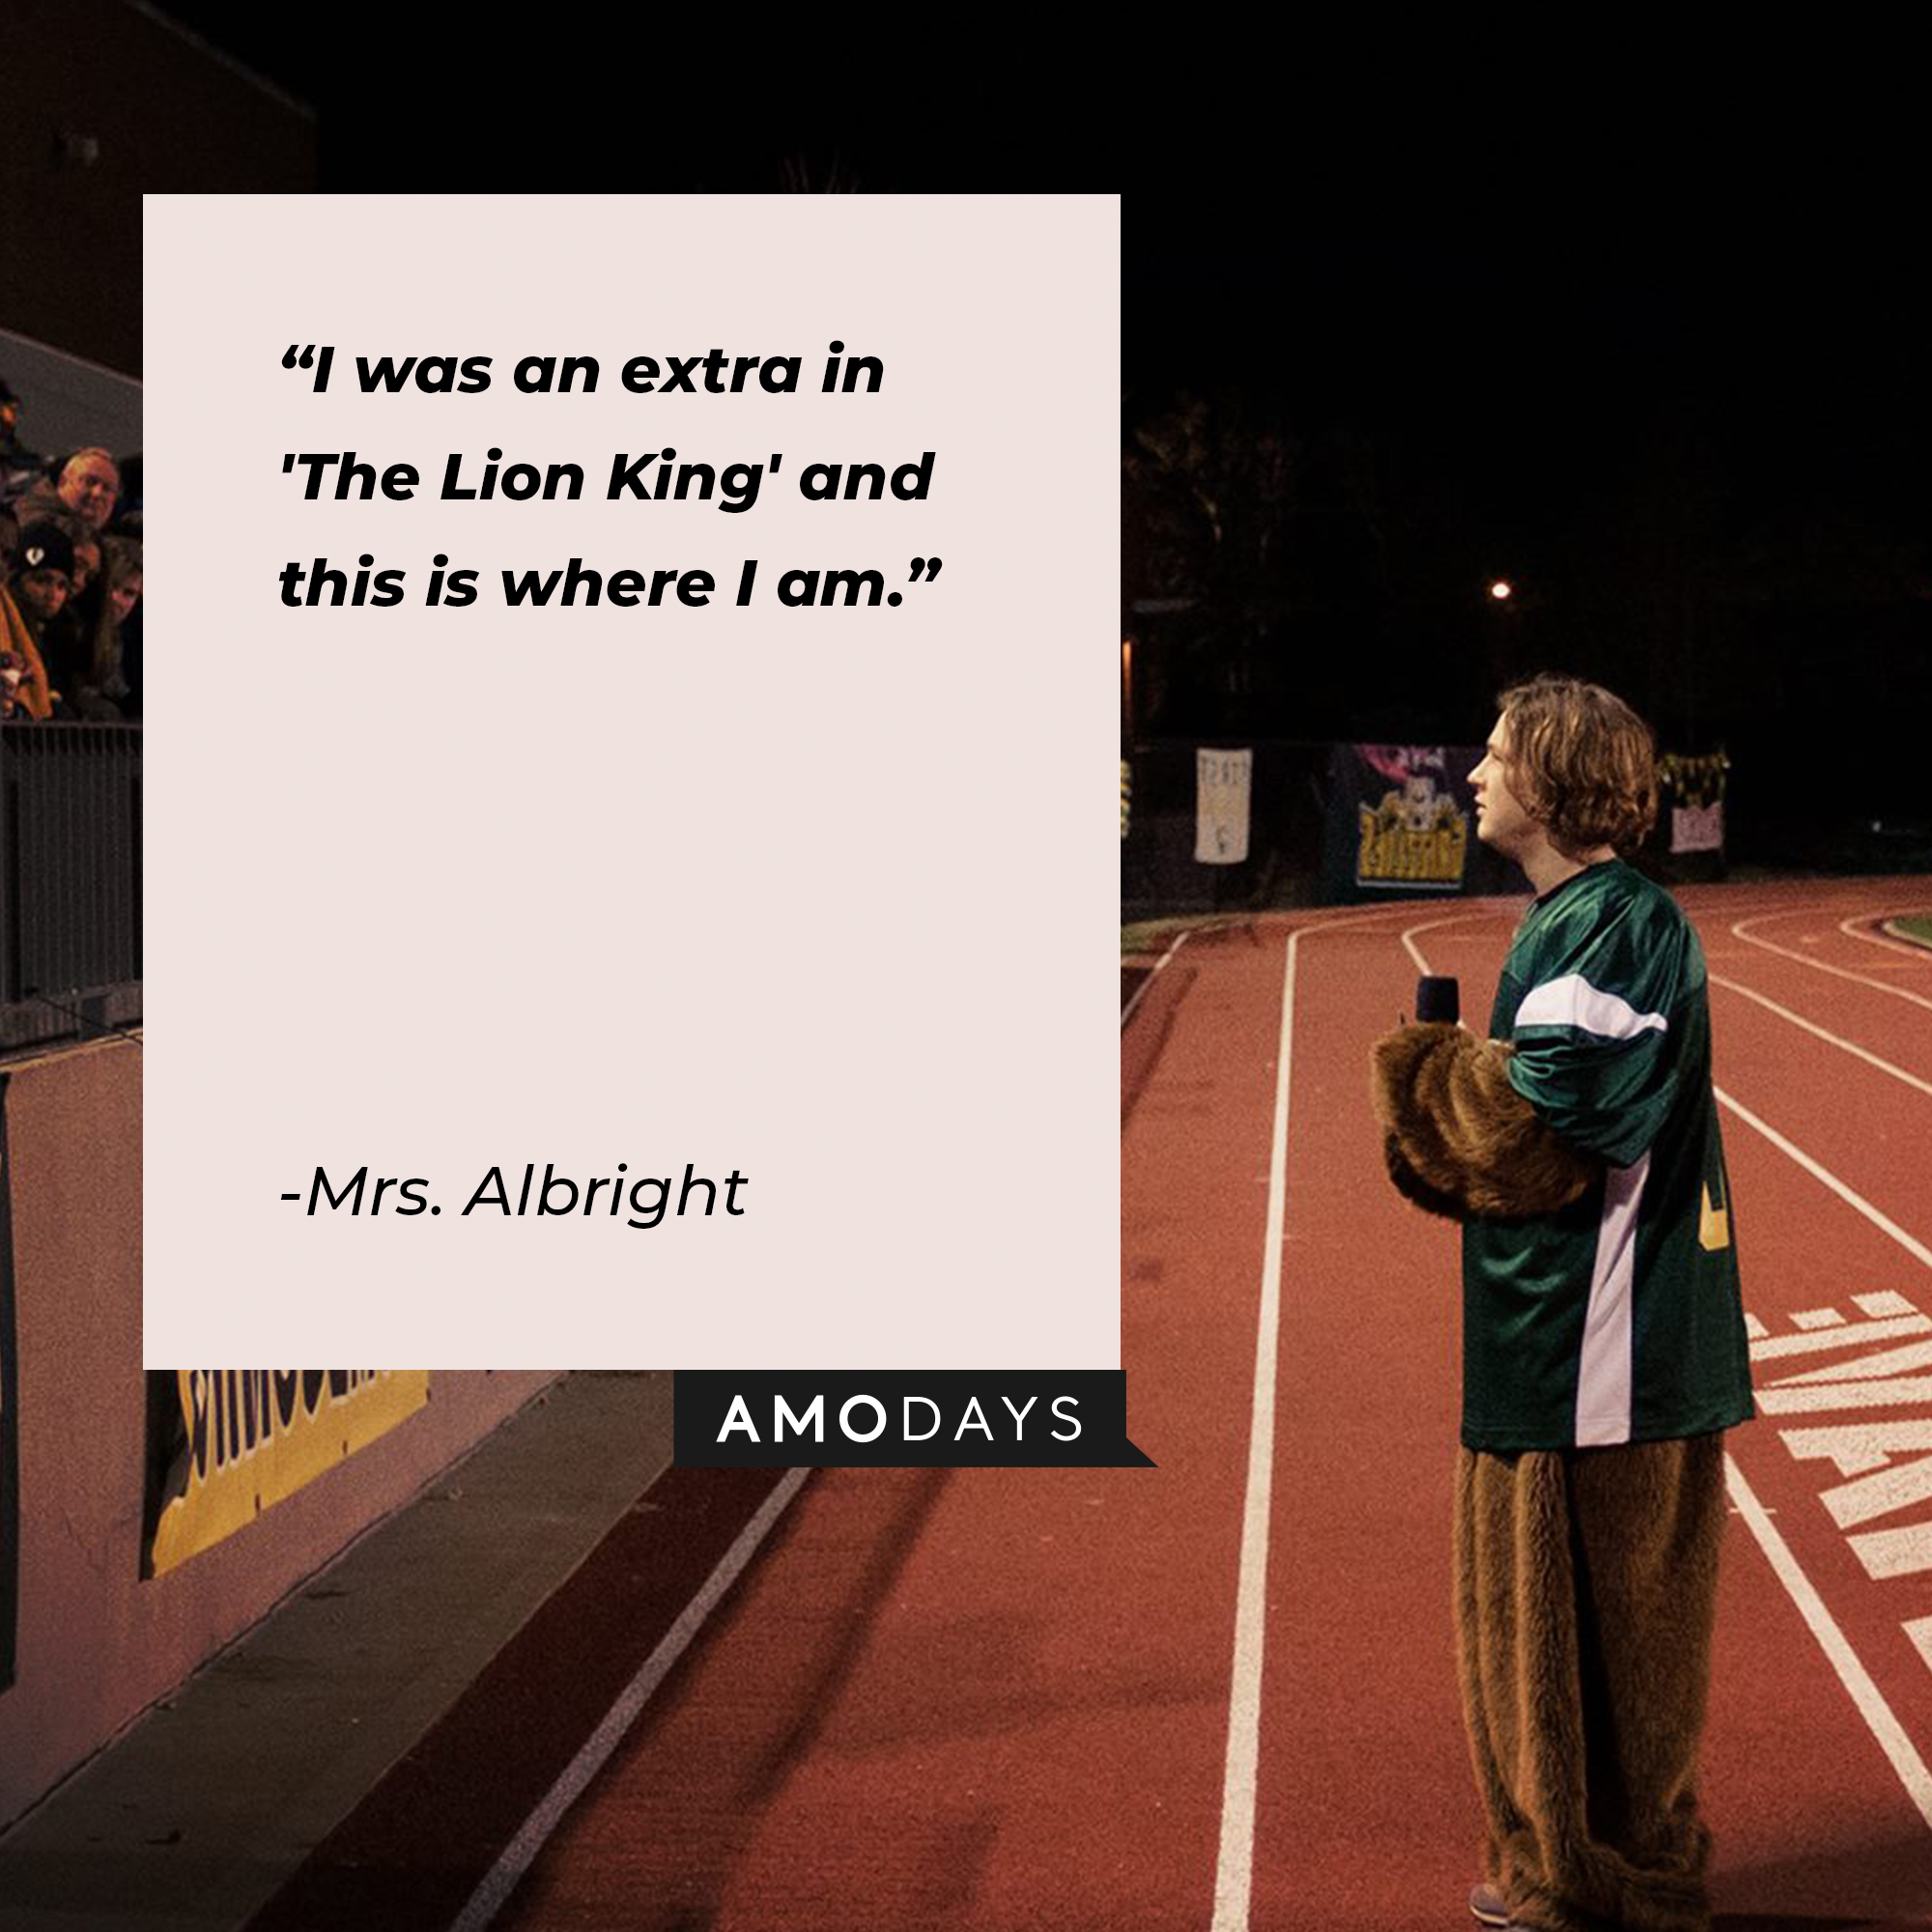 Mrs. Albright's quote, "I was an extra in 'The Lion King' and this is where I am." | Image: facebook.com/LoveSimonMovie